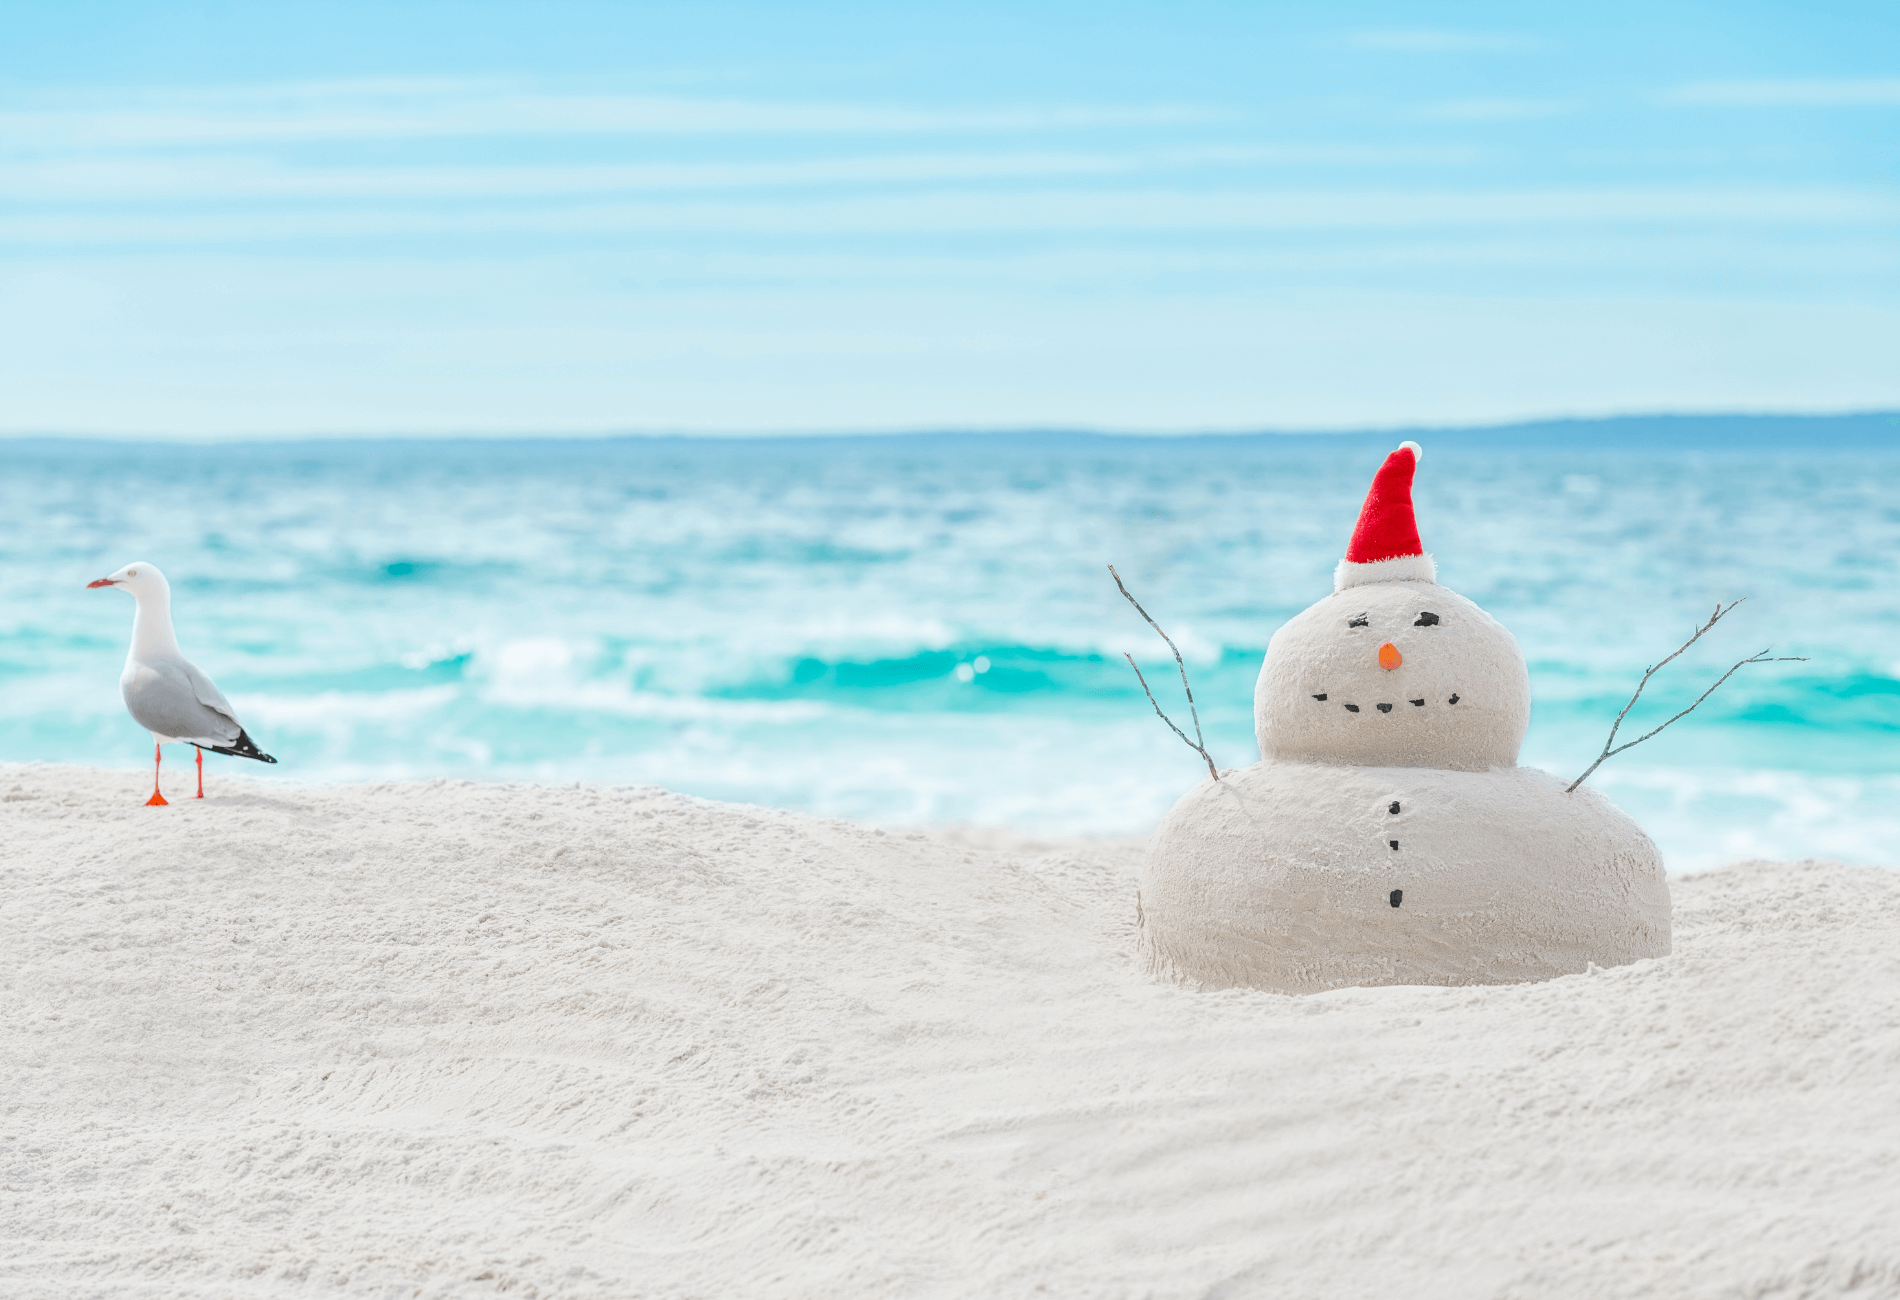 snowman made of sand on beach with turquoise waters